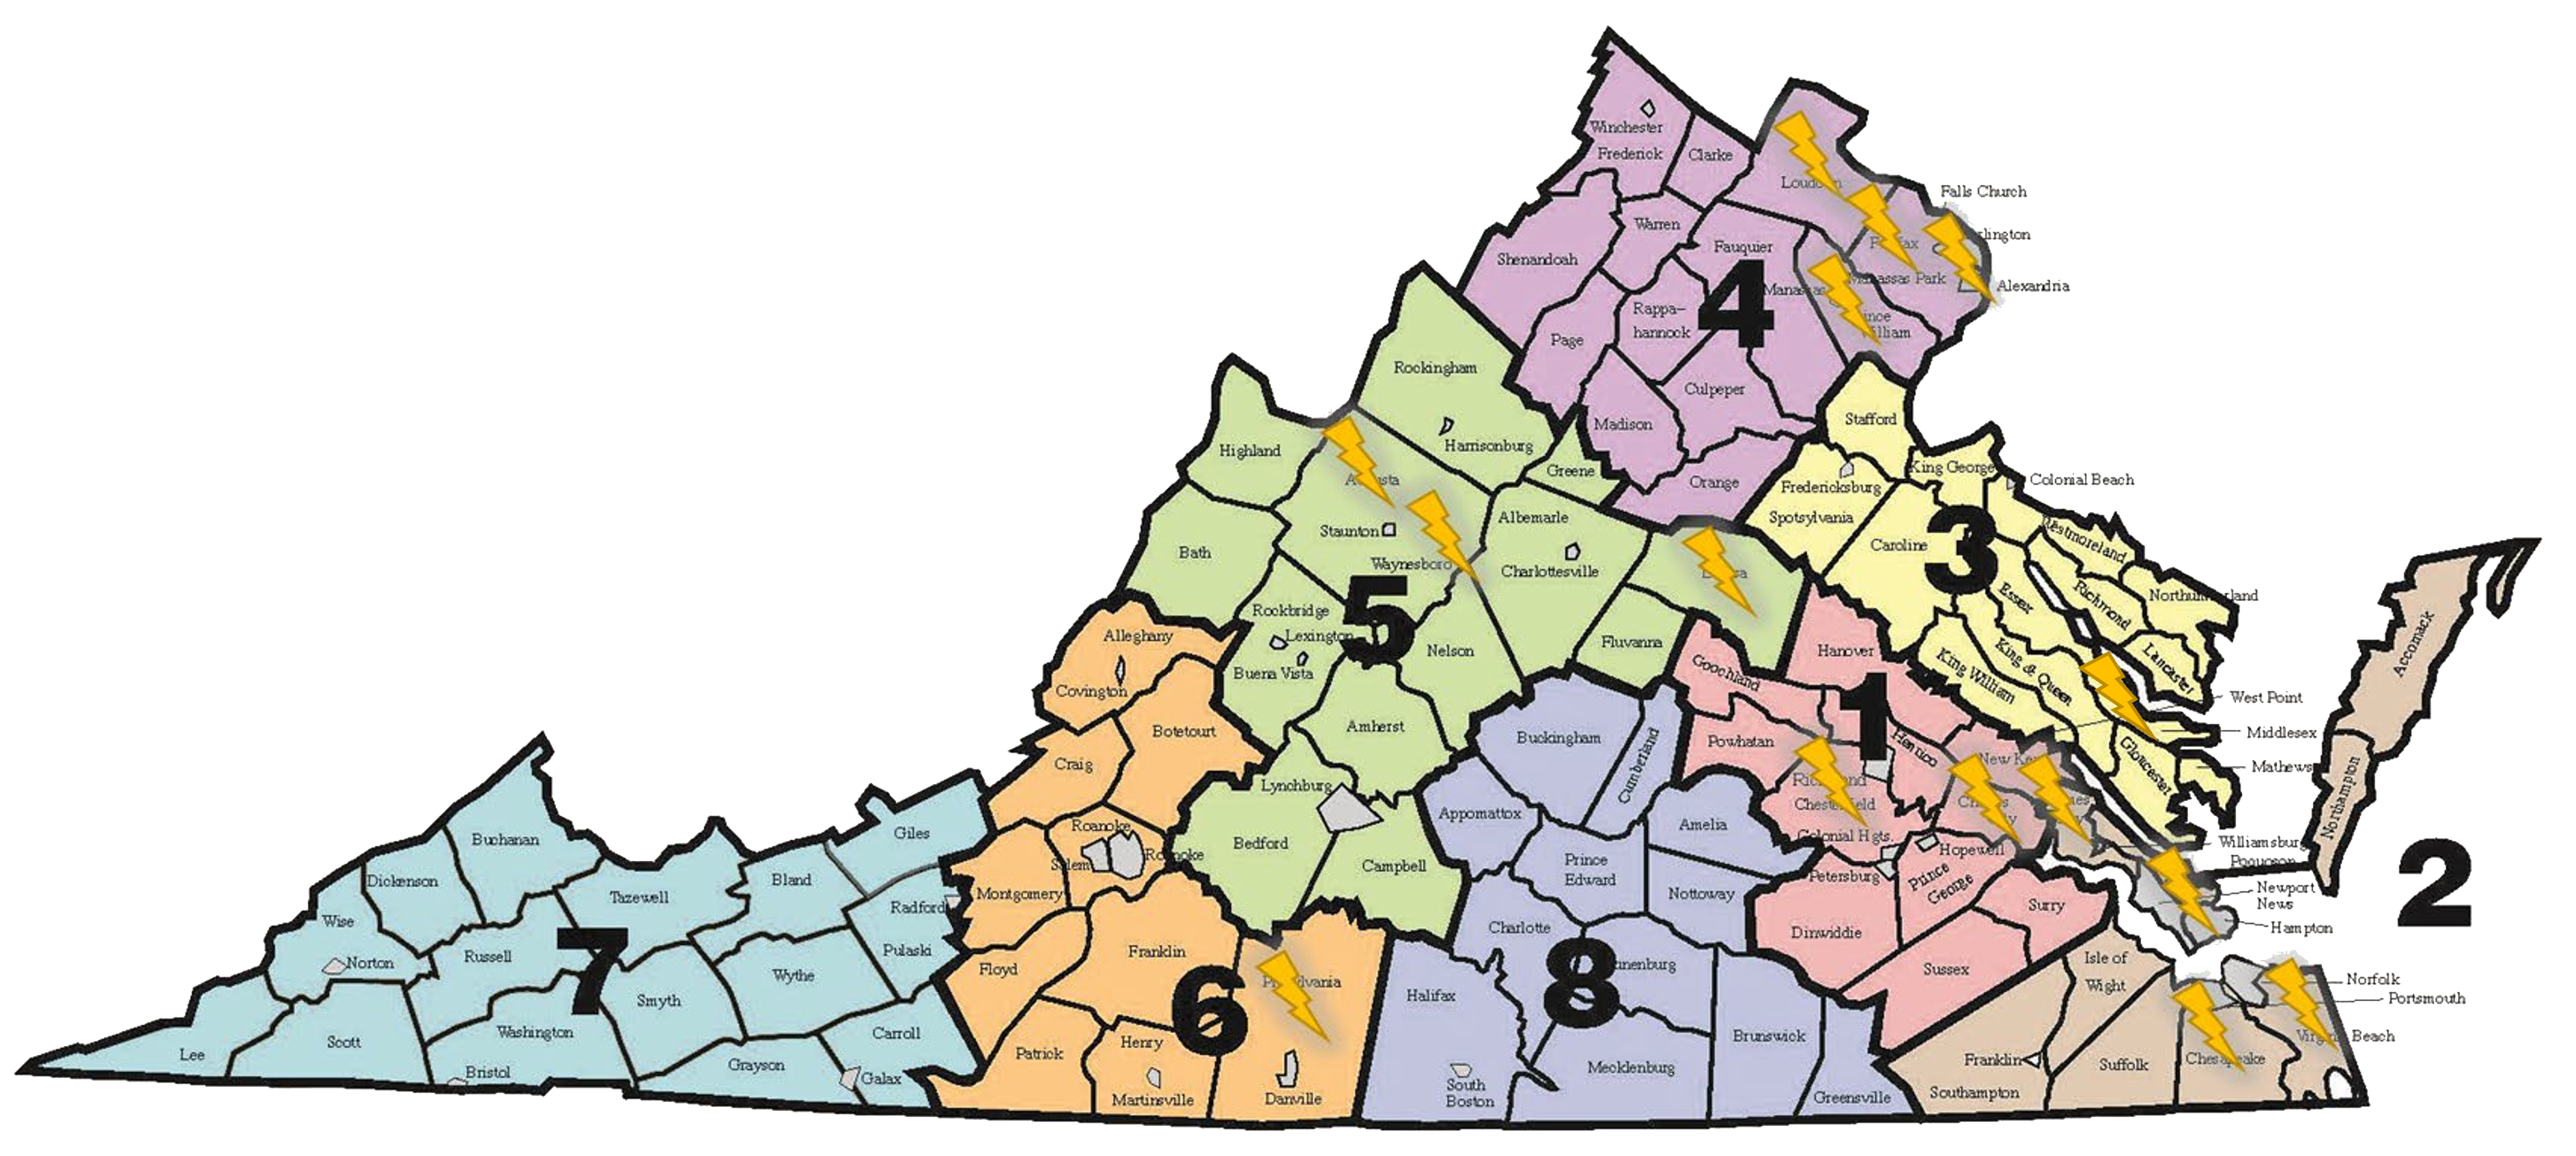 Map of Virginia showing localities with Jouley electric school buses